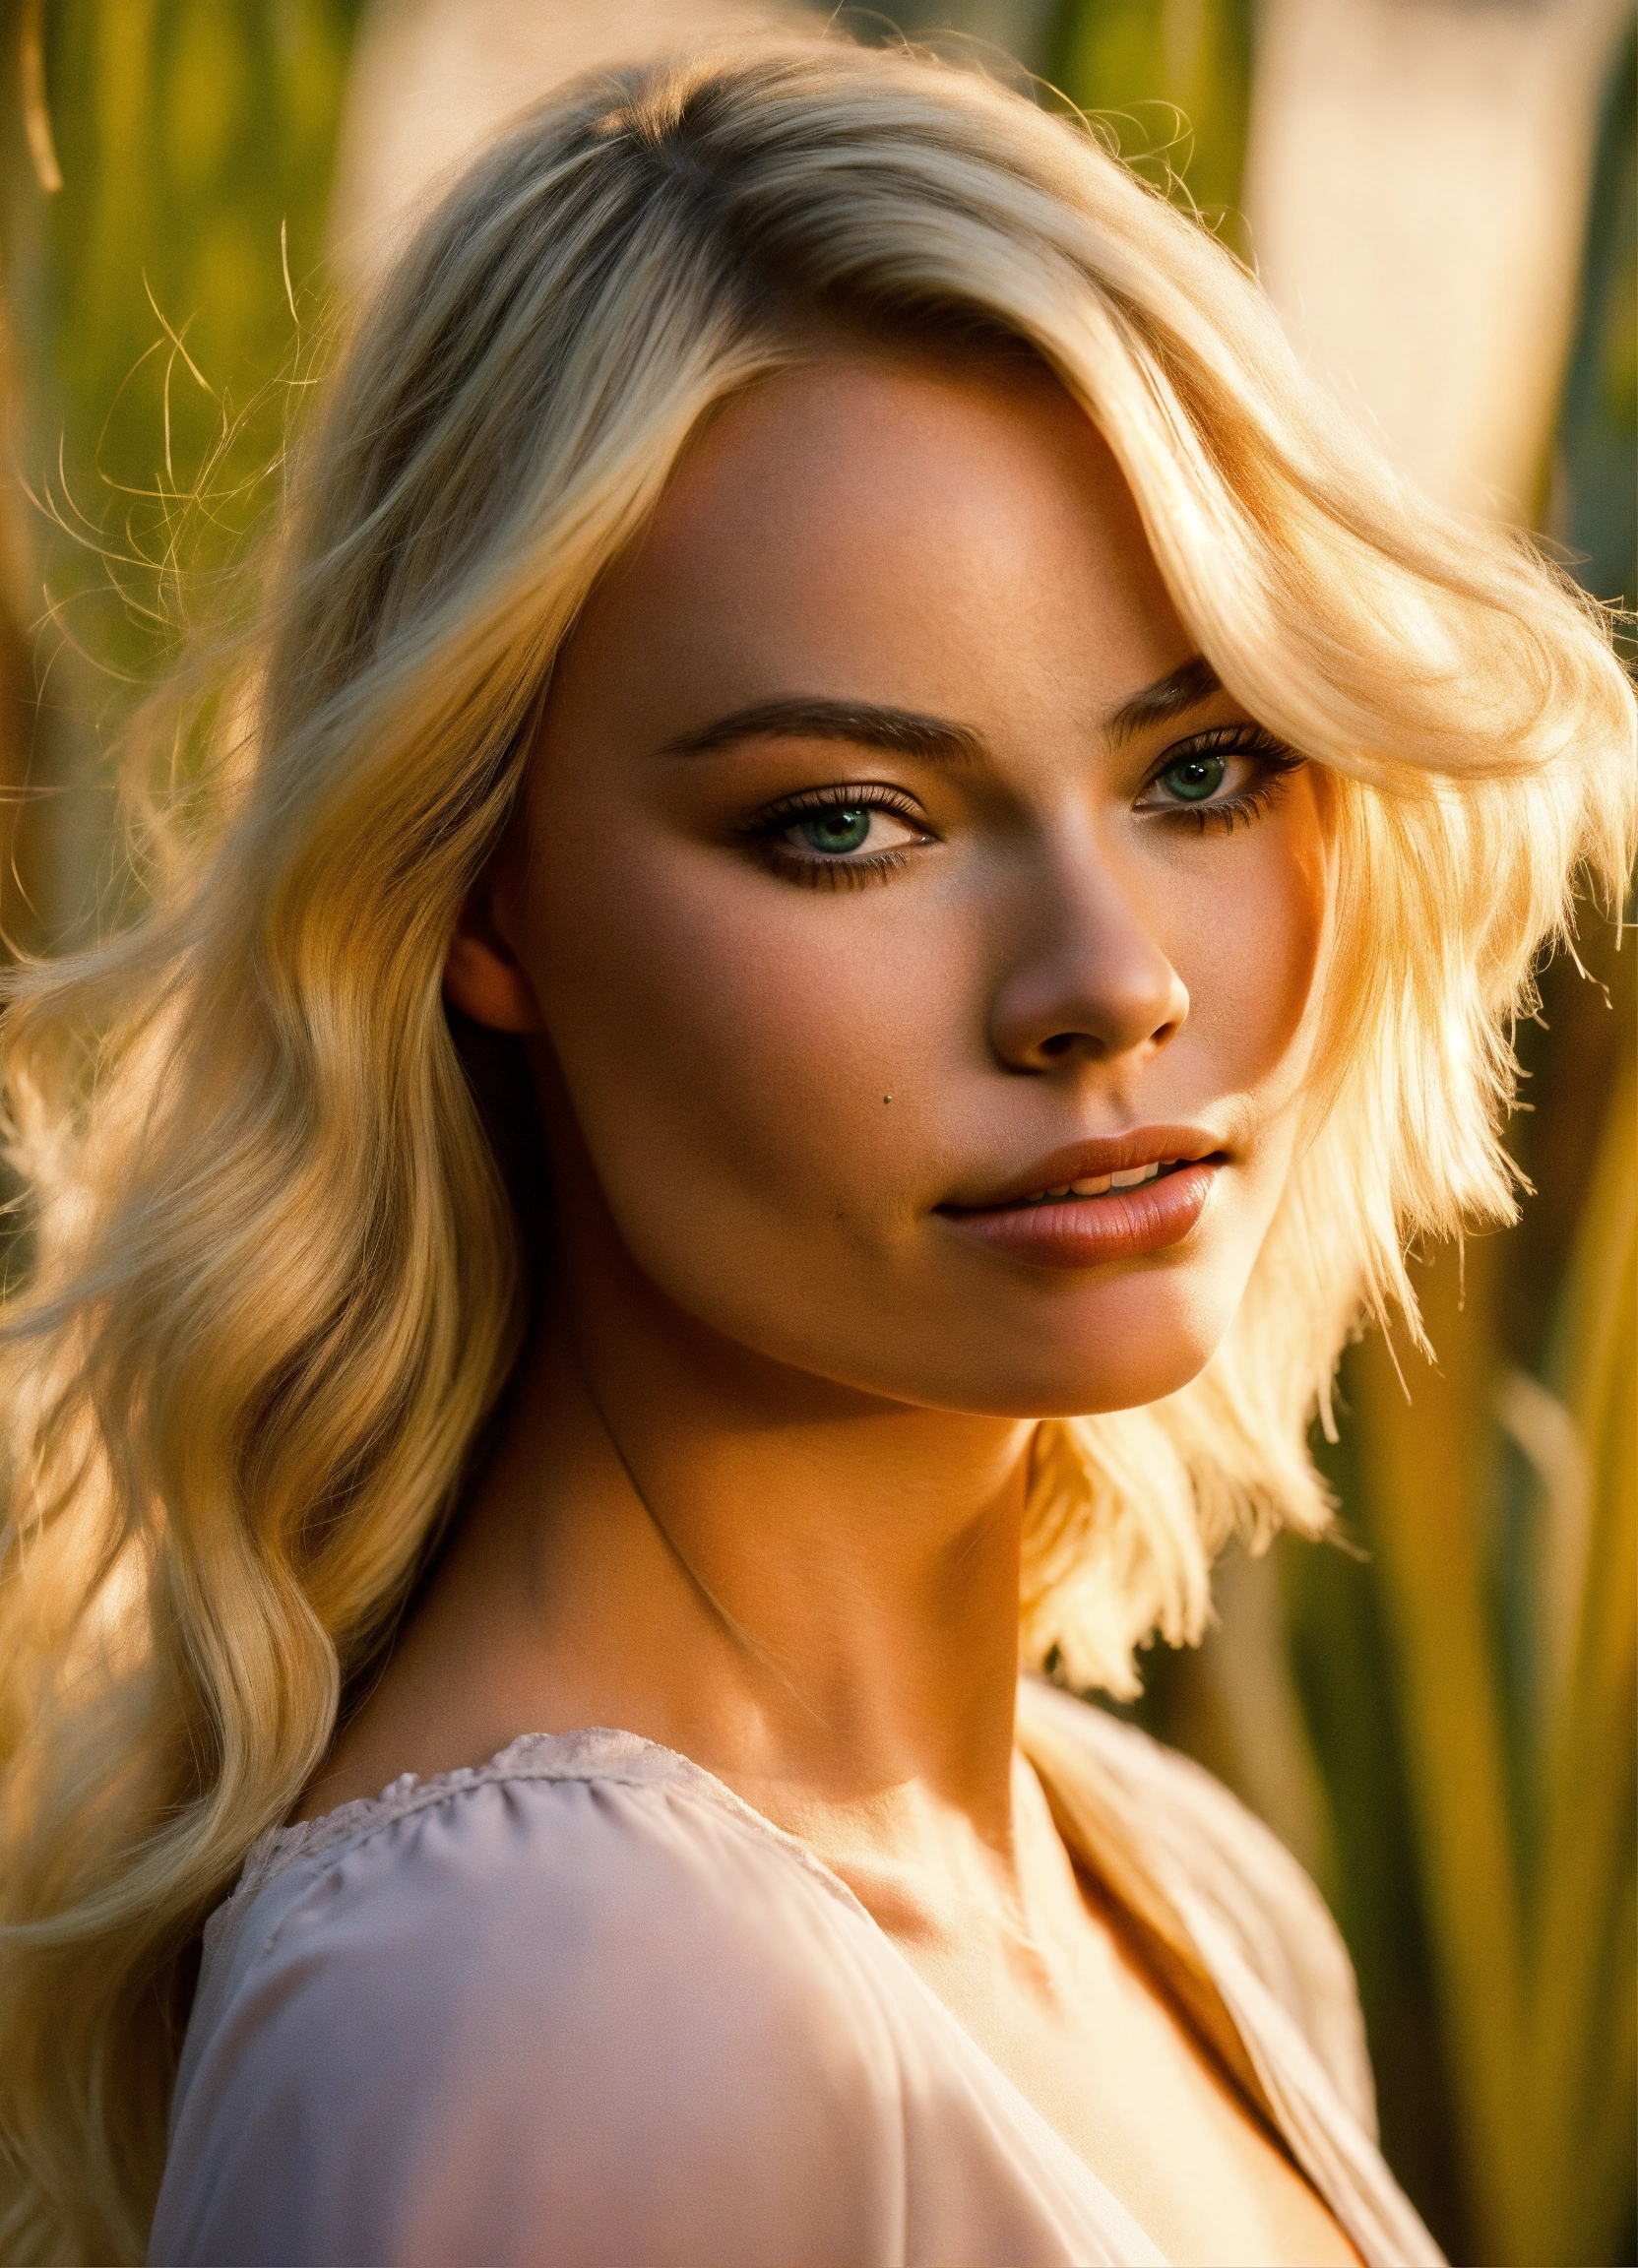 Lexica A Gorgeous Blonde Woman That Looks Like Margot Robbie She Must Be Giant In Size